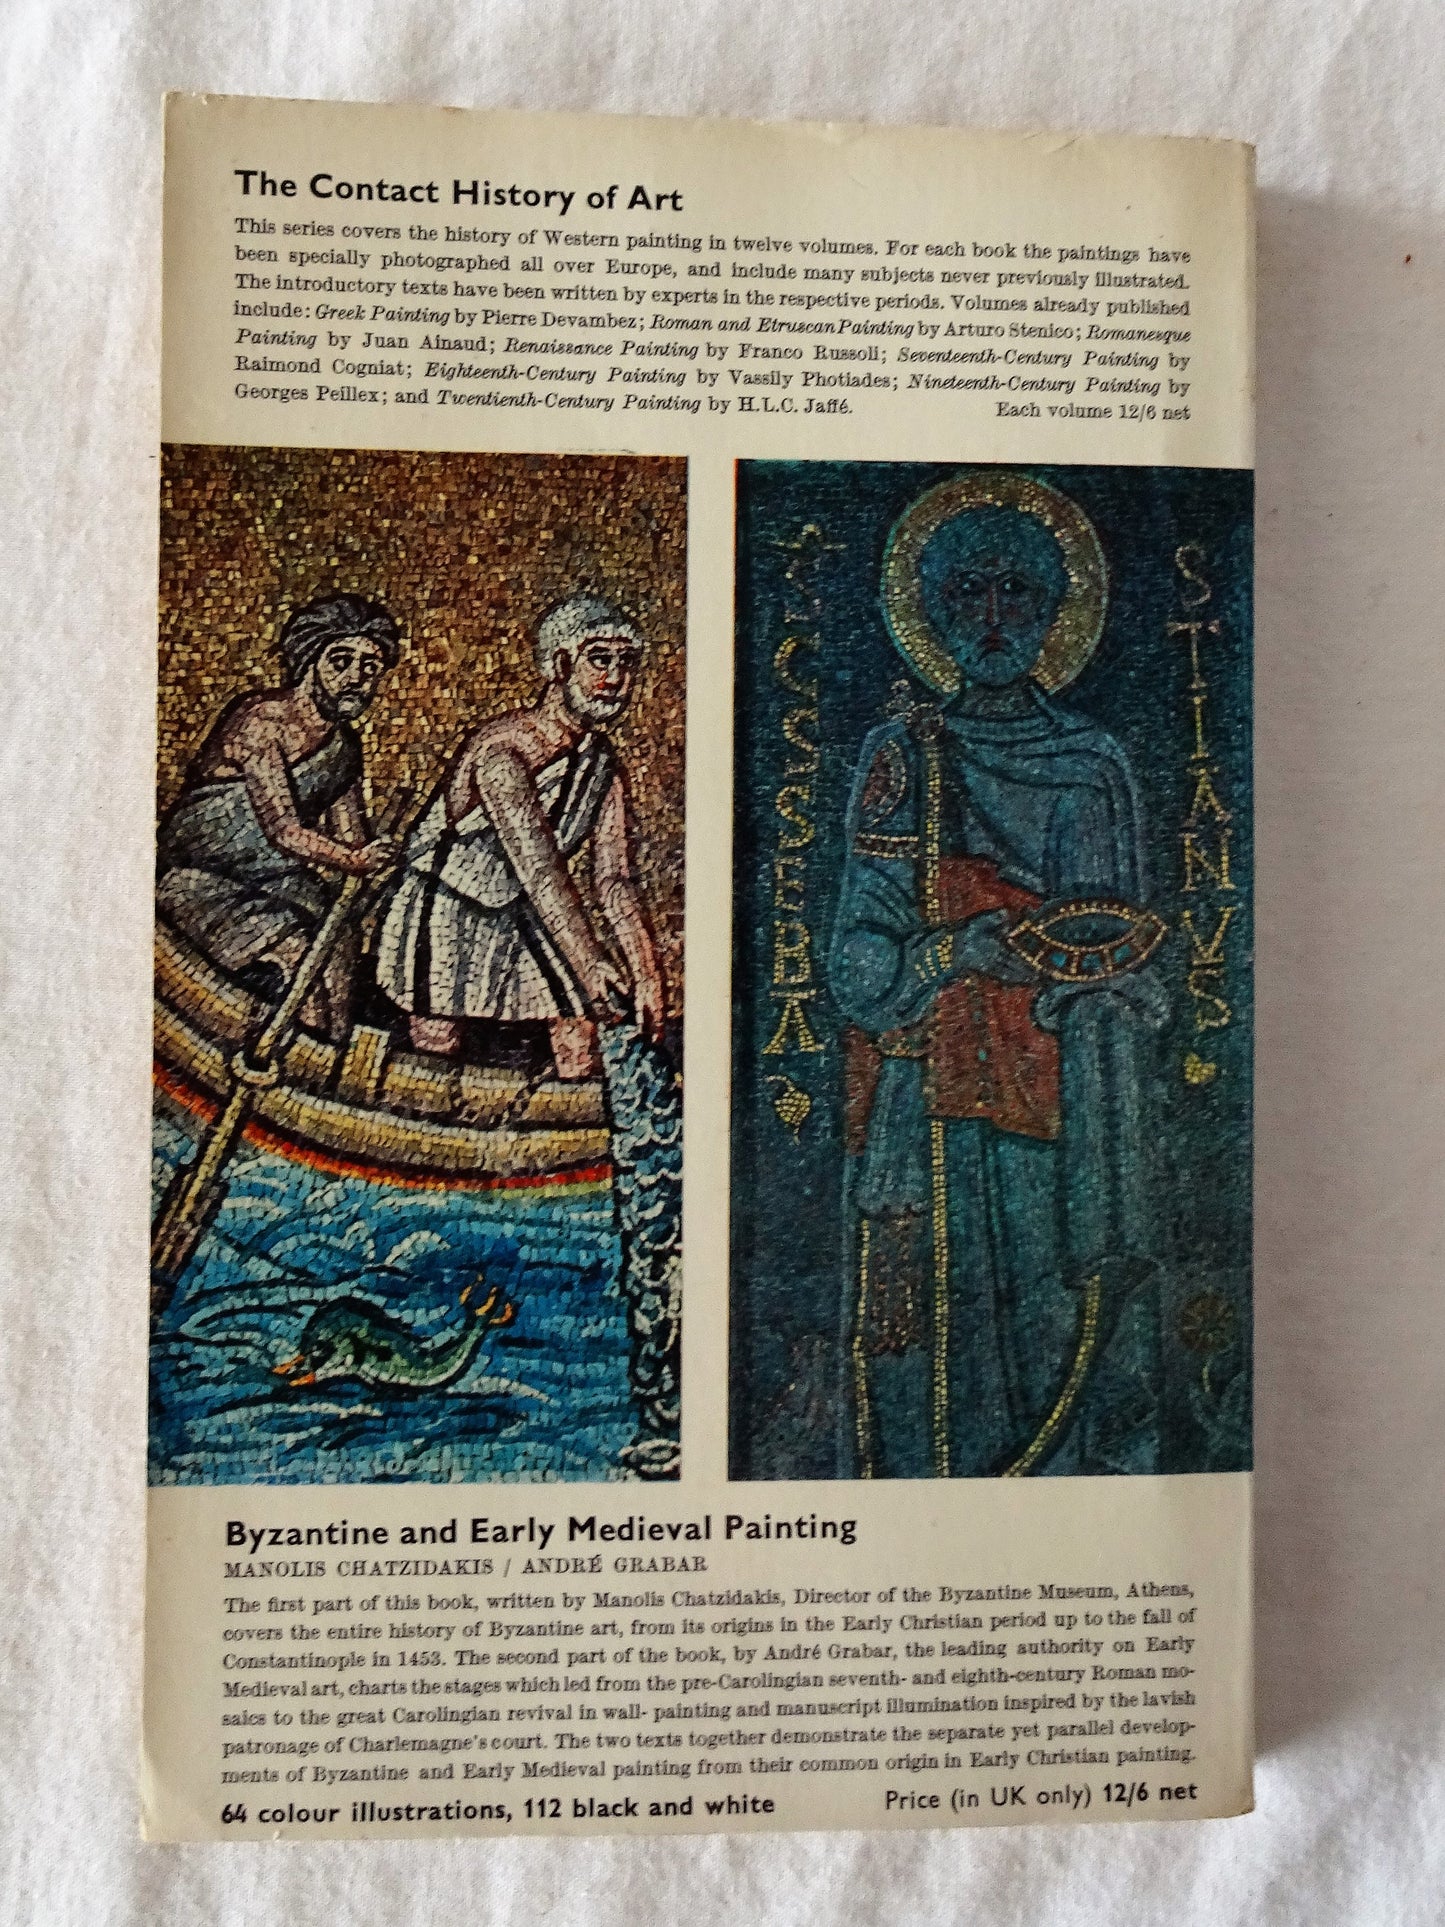 Byzantine and Early Medieval Painting by Manolis Chatzidakis and Andre Grabar